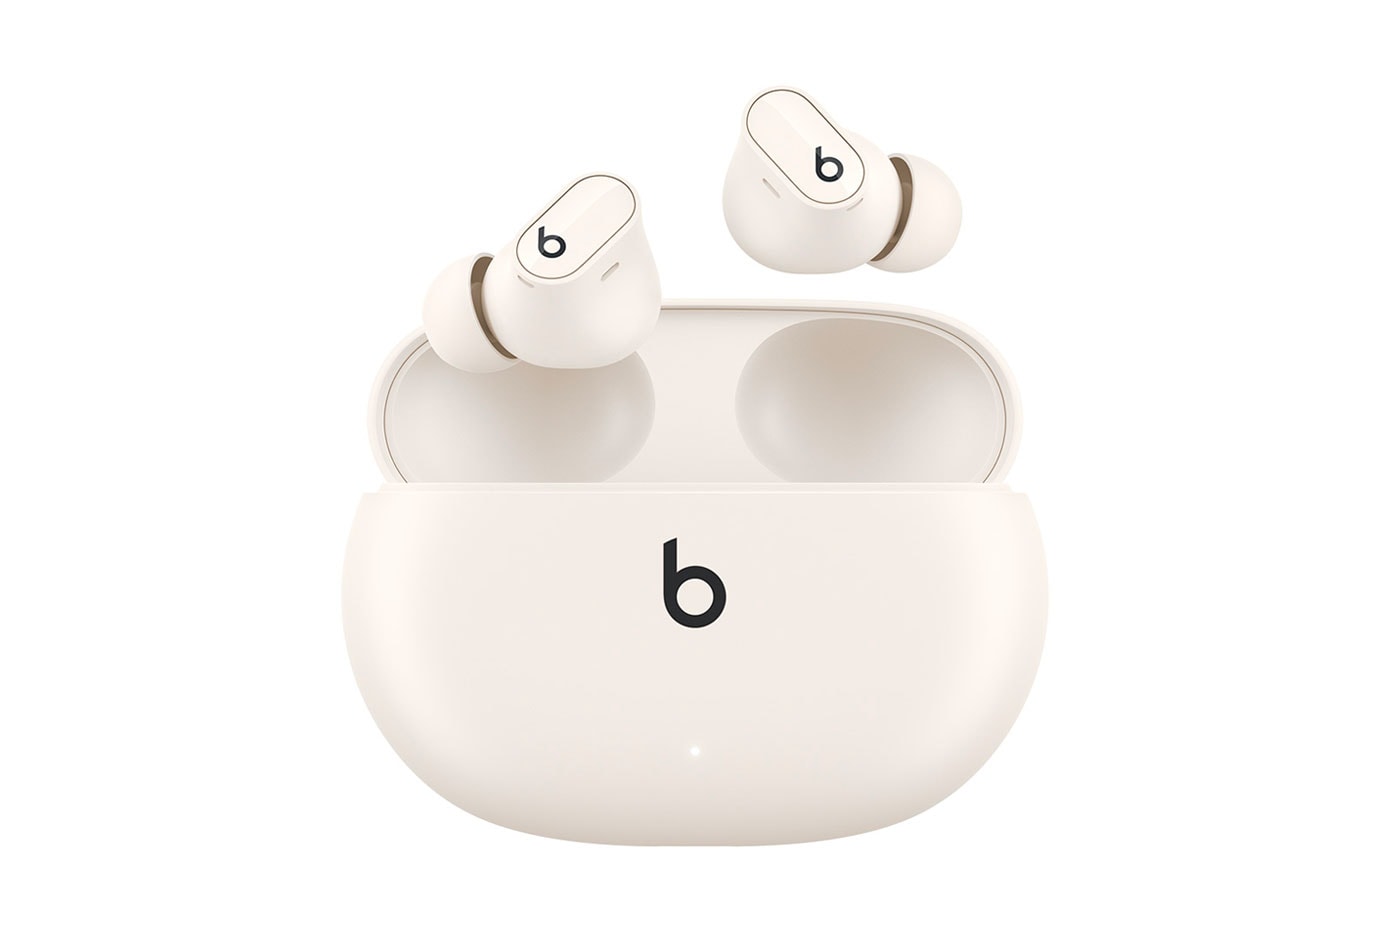 Beats Studio Buds plus True Wireless Noise Cancelling Earbuds transparent white black usb c release info date price